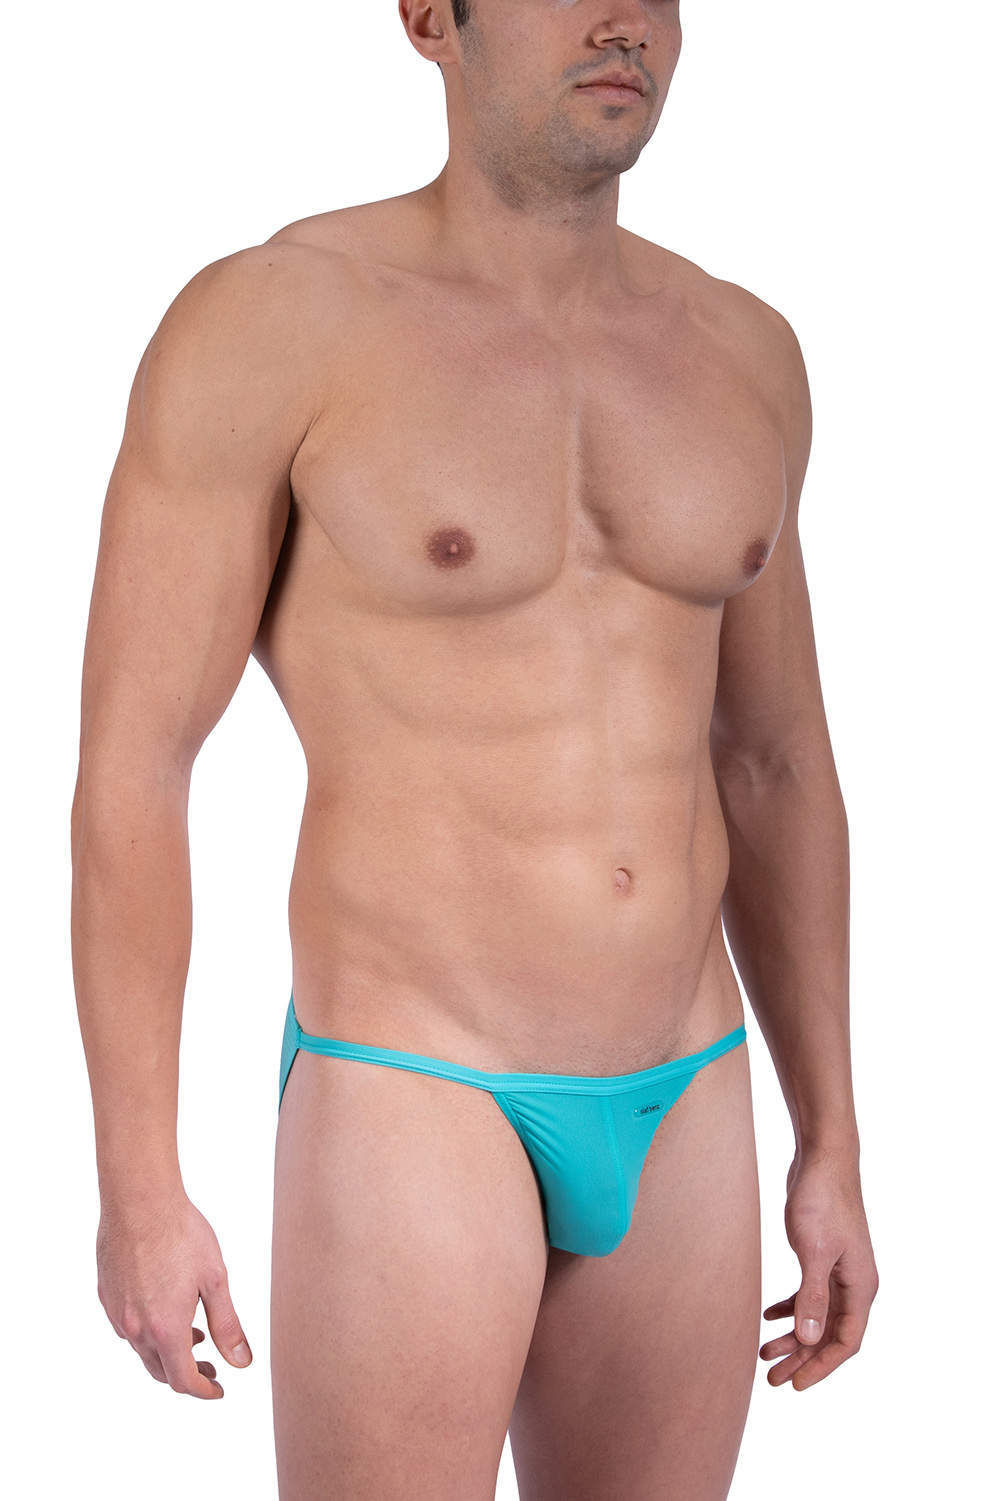 Men Lack Vinyl Rio Body Swimsuit by Jp-beach, Tanga Lackstretch, Handmade  in Germany Sexy Tight, 9 Different Colors, XS-XXL -  Canada